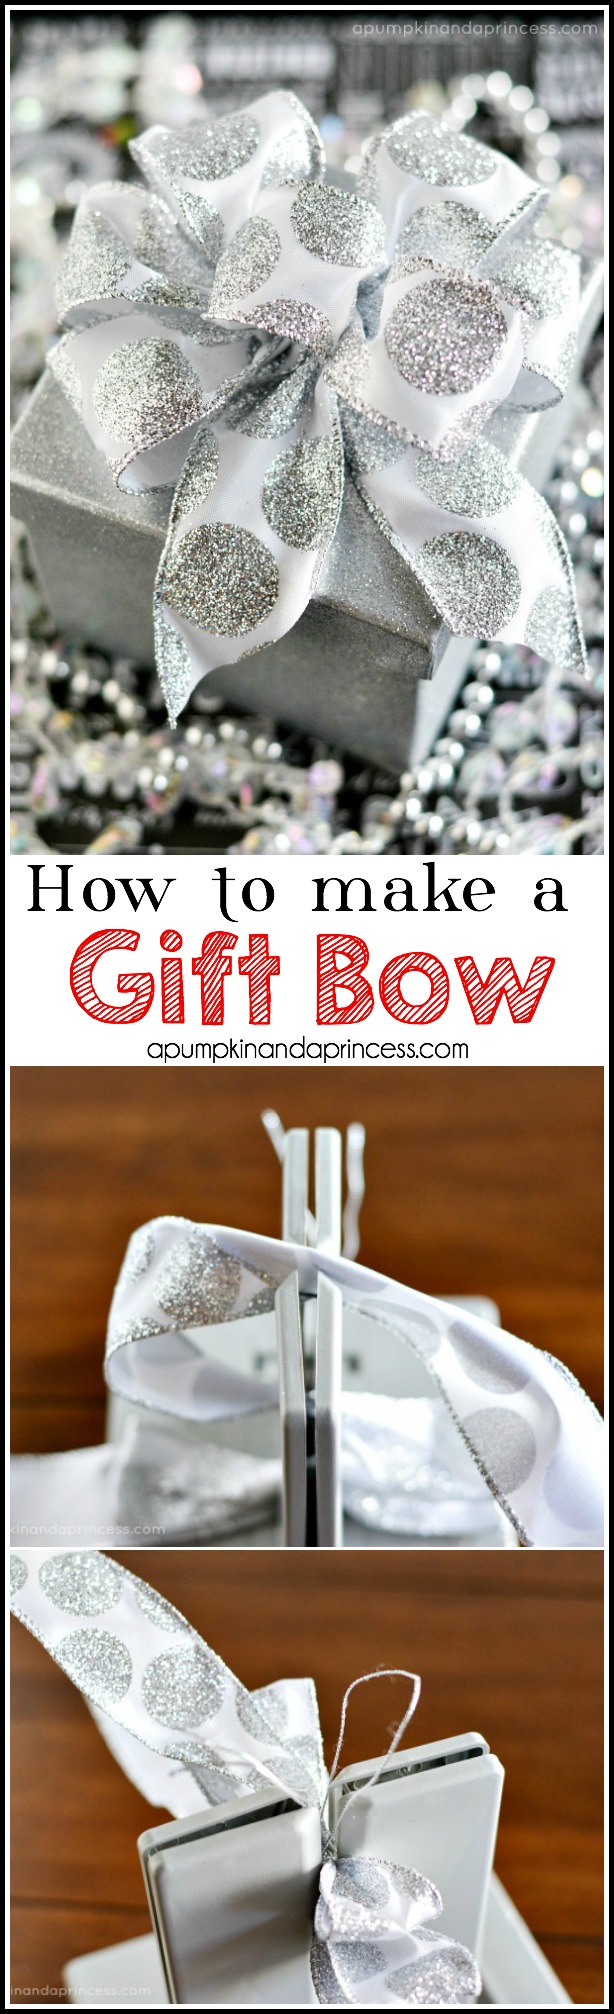 How to make a gift bow with a Bowdabra - A Pumpkin And A Princess